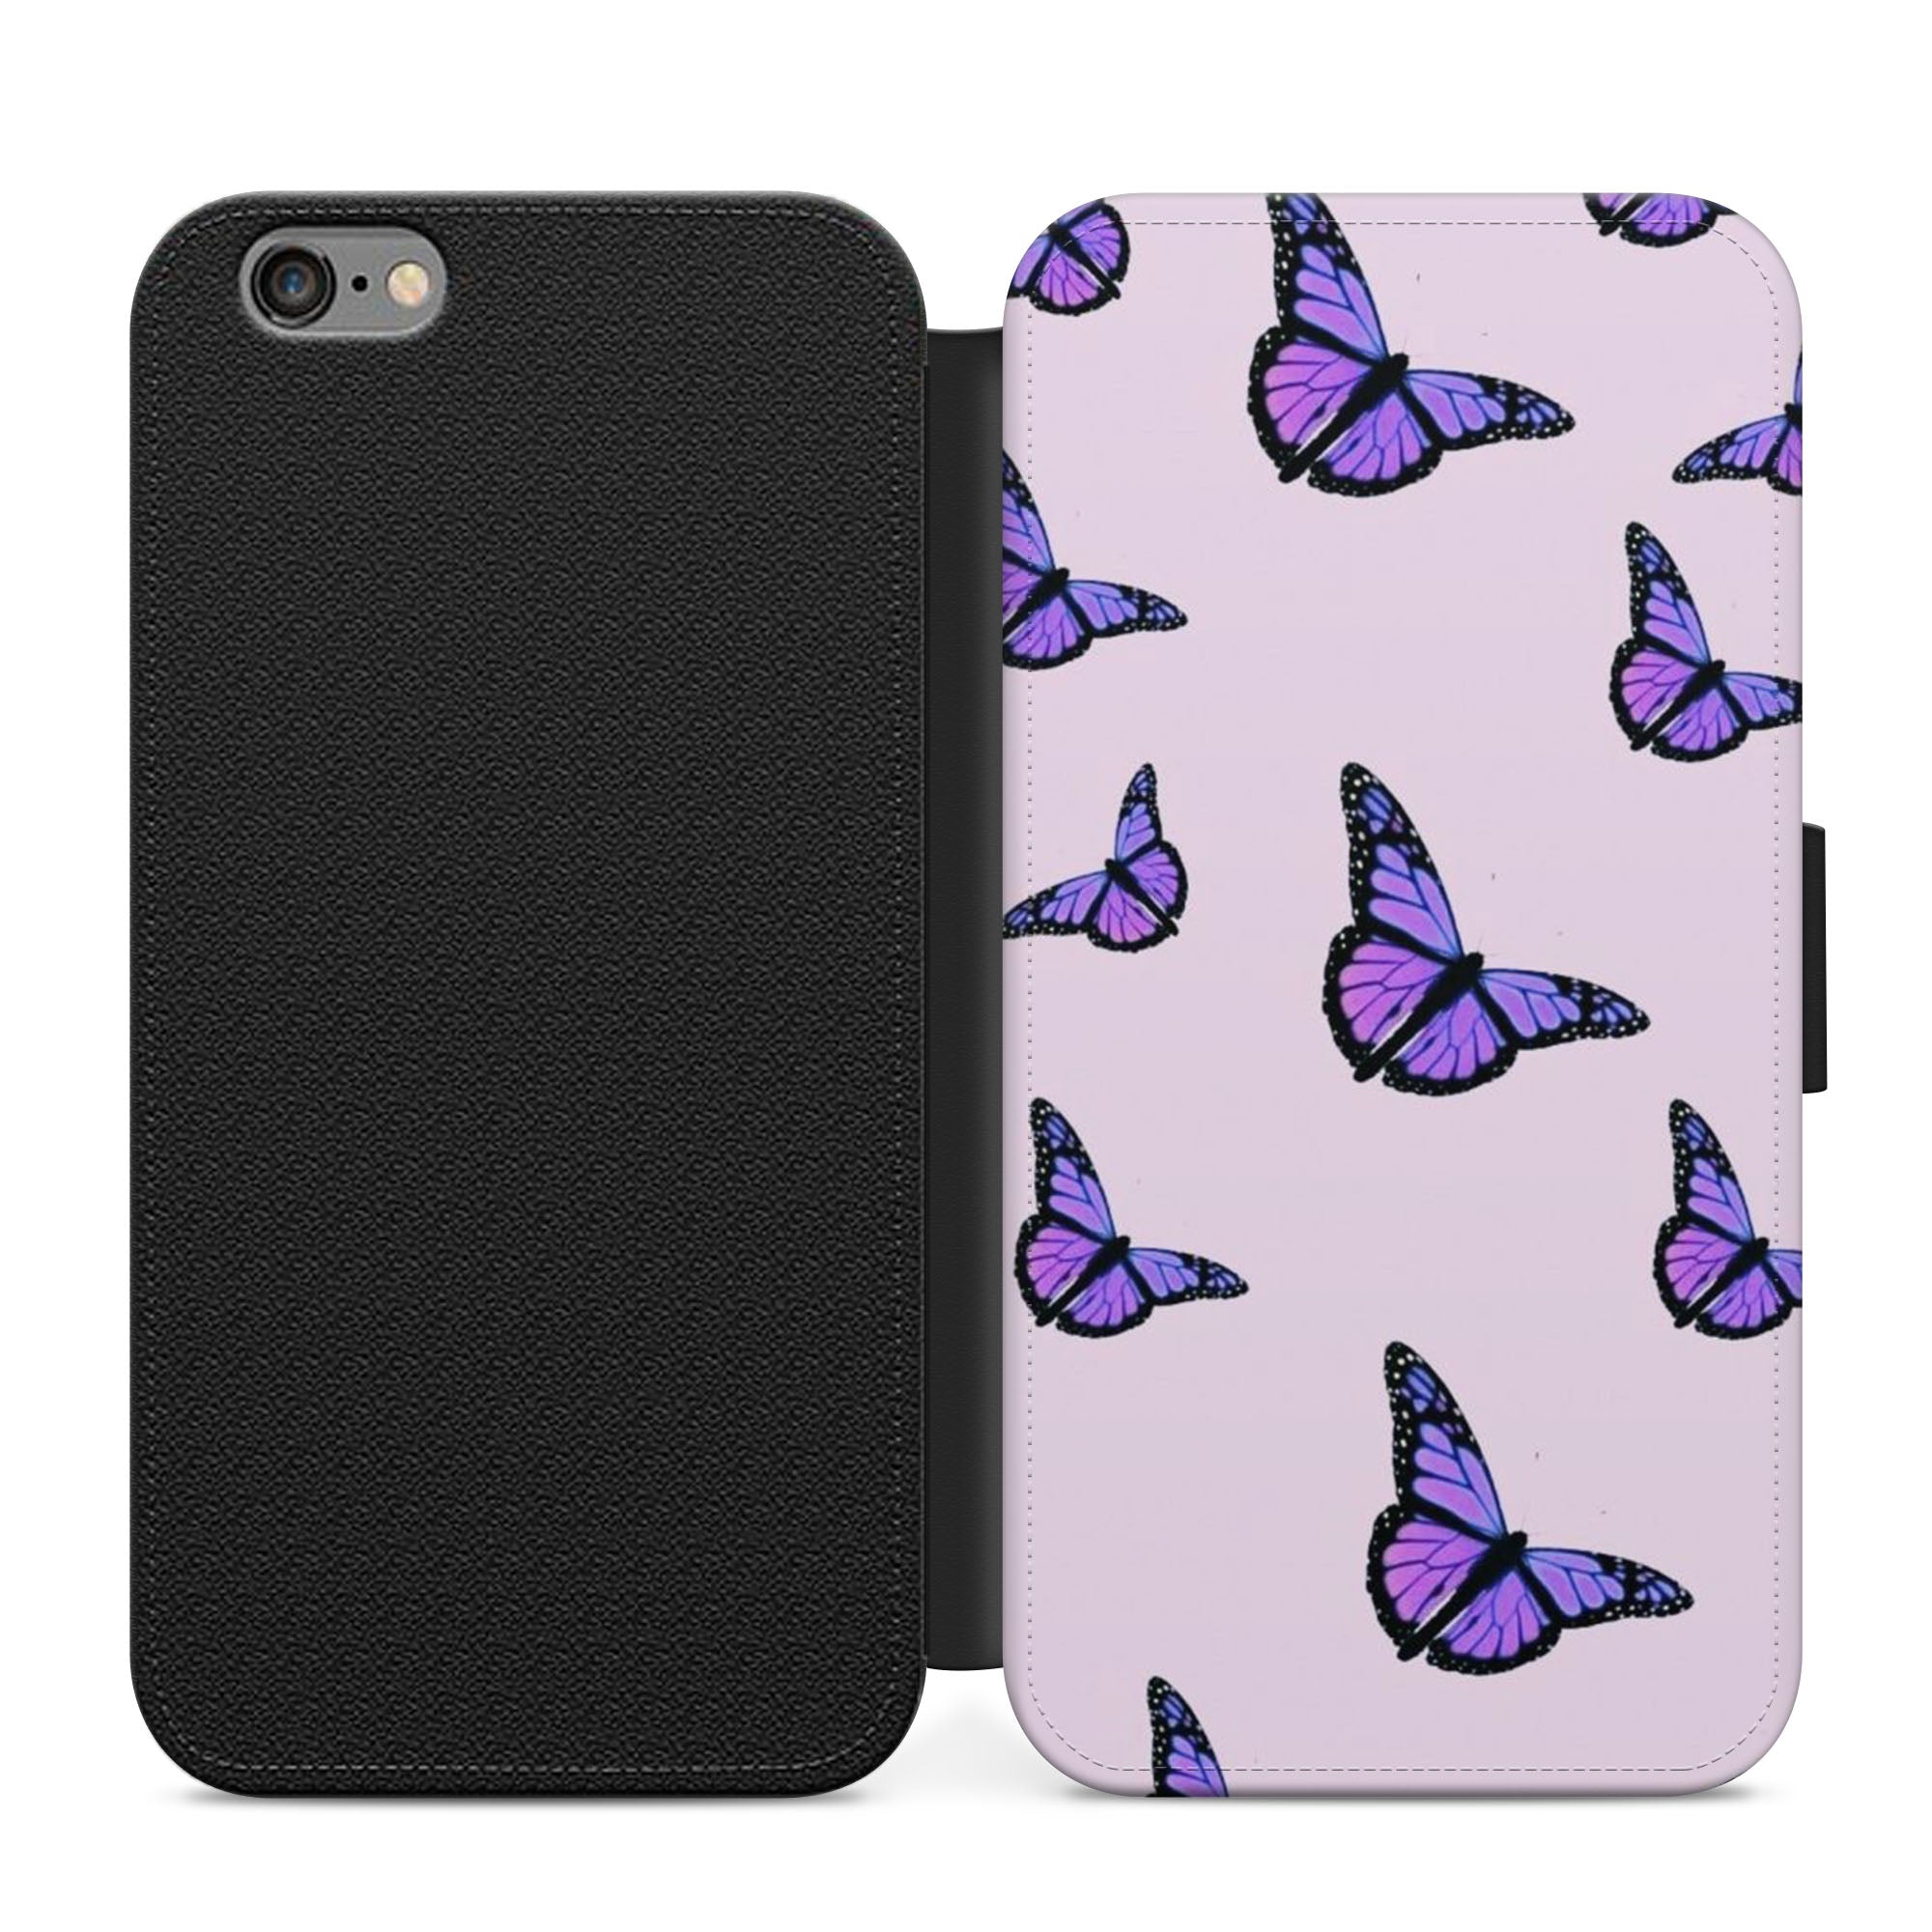 Aesthetic Pastel Butterfly Faux Leather Flip Case Wallet for iPhone / Samsung